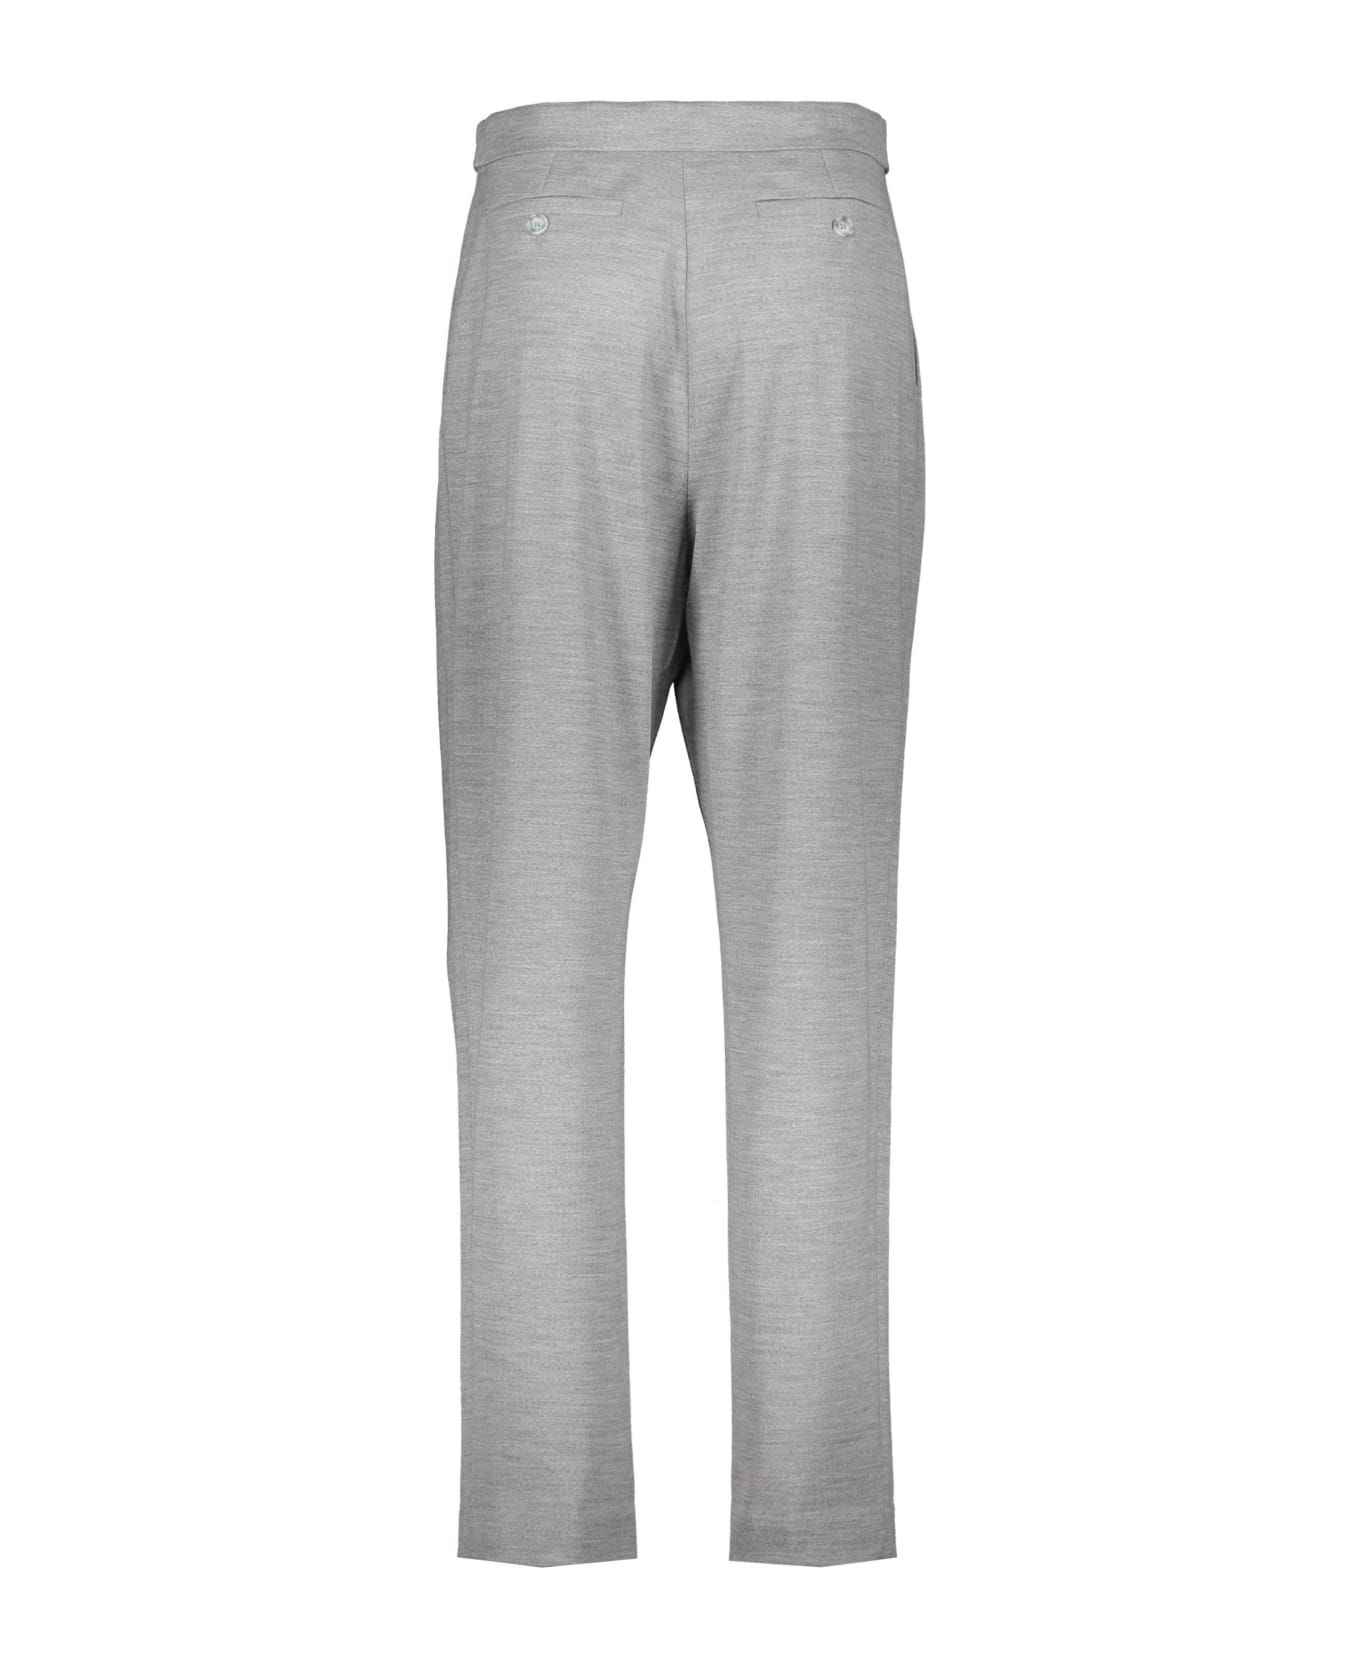 Burberry Long Trousers - grey